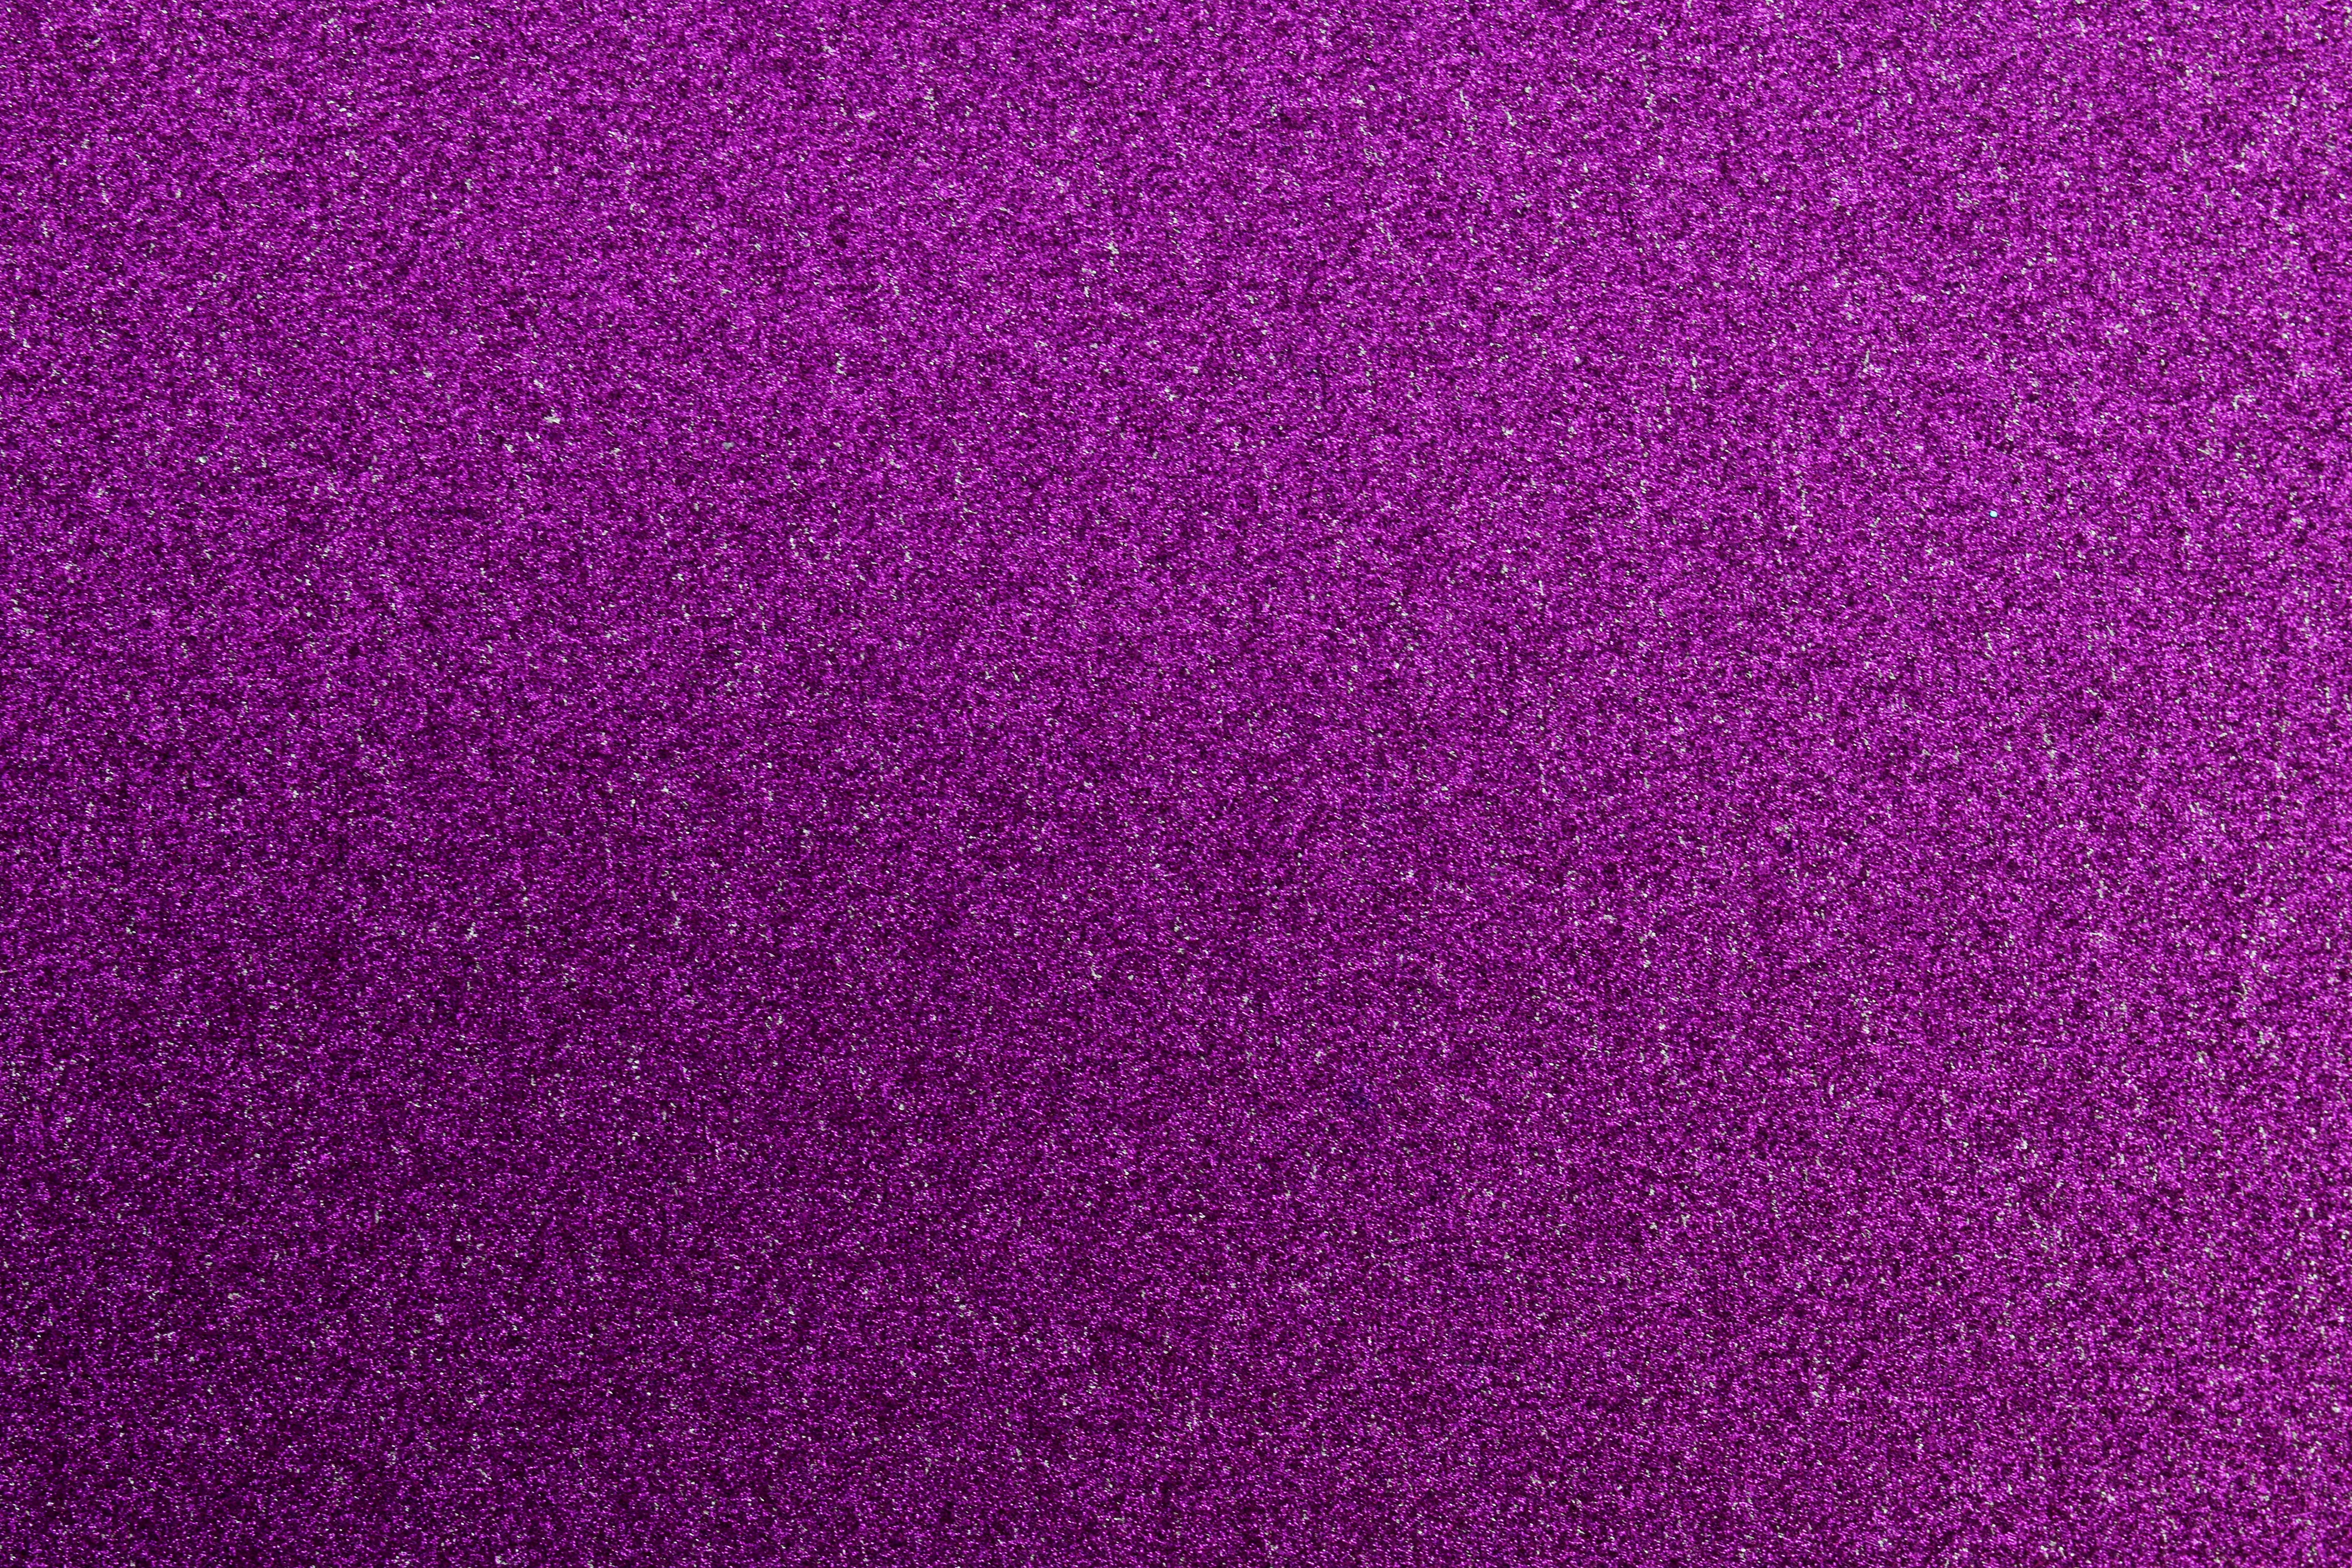 94173 download wallpaper purple, violet, texture, textures, surface, rough, rugged screensavers and pictures for free